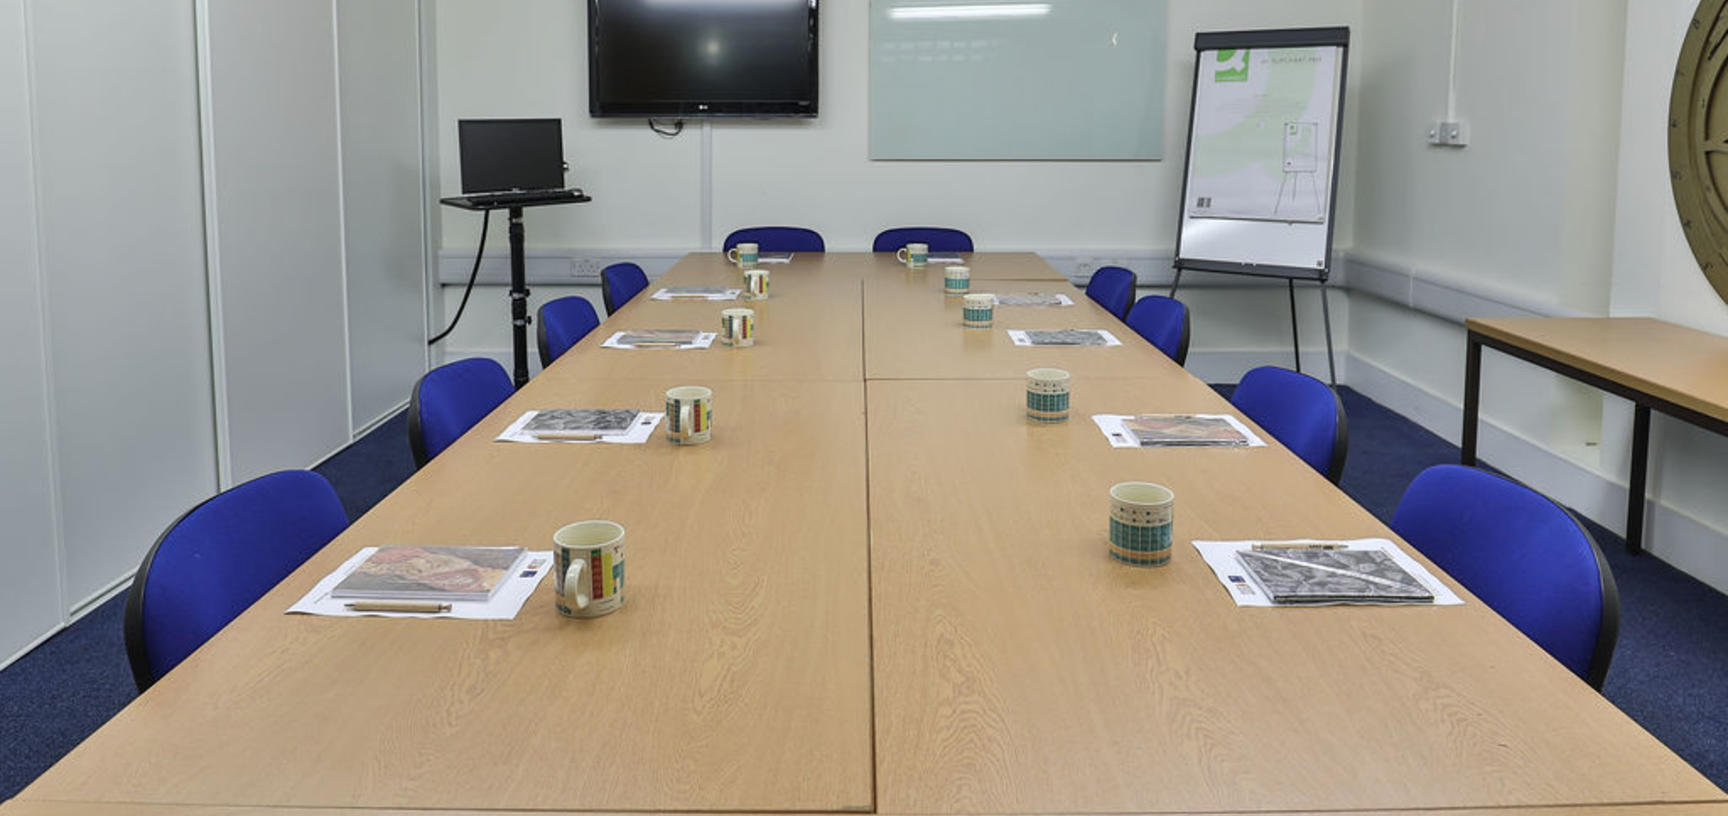 The Seminar Room in a boardroom layout.